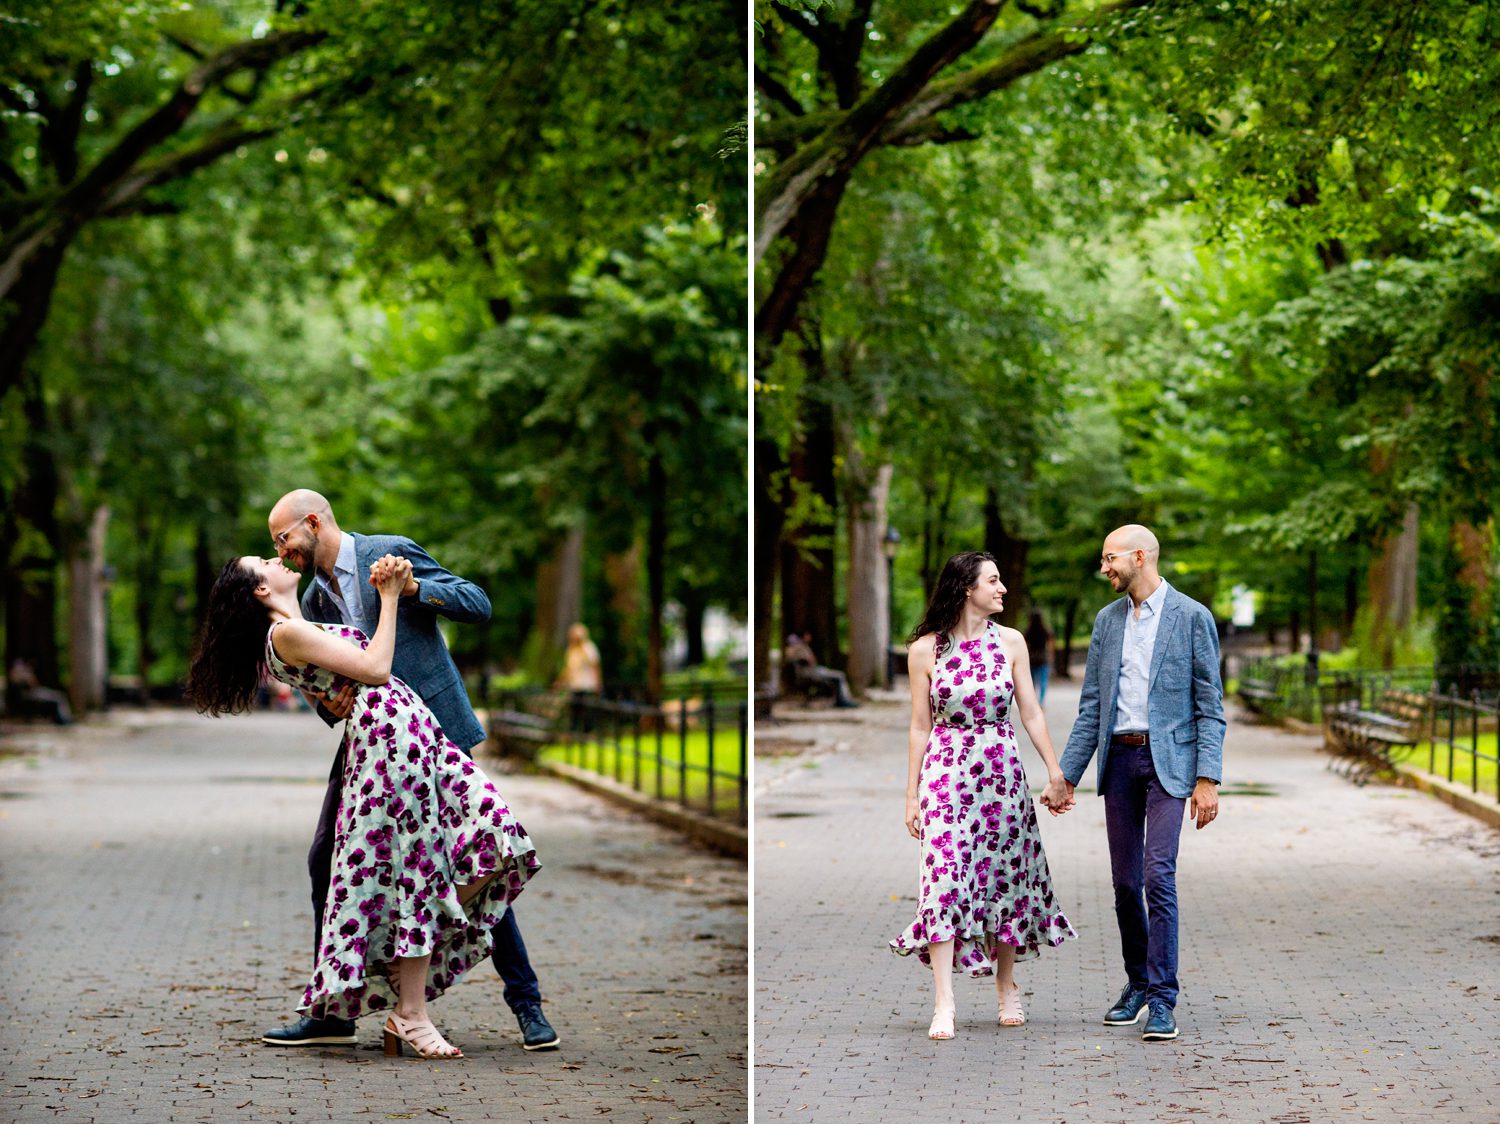 Where to Take Engagement Photos in NYC